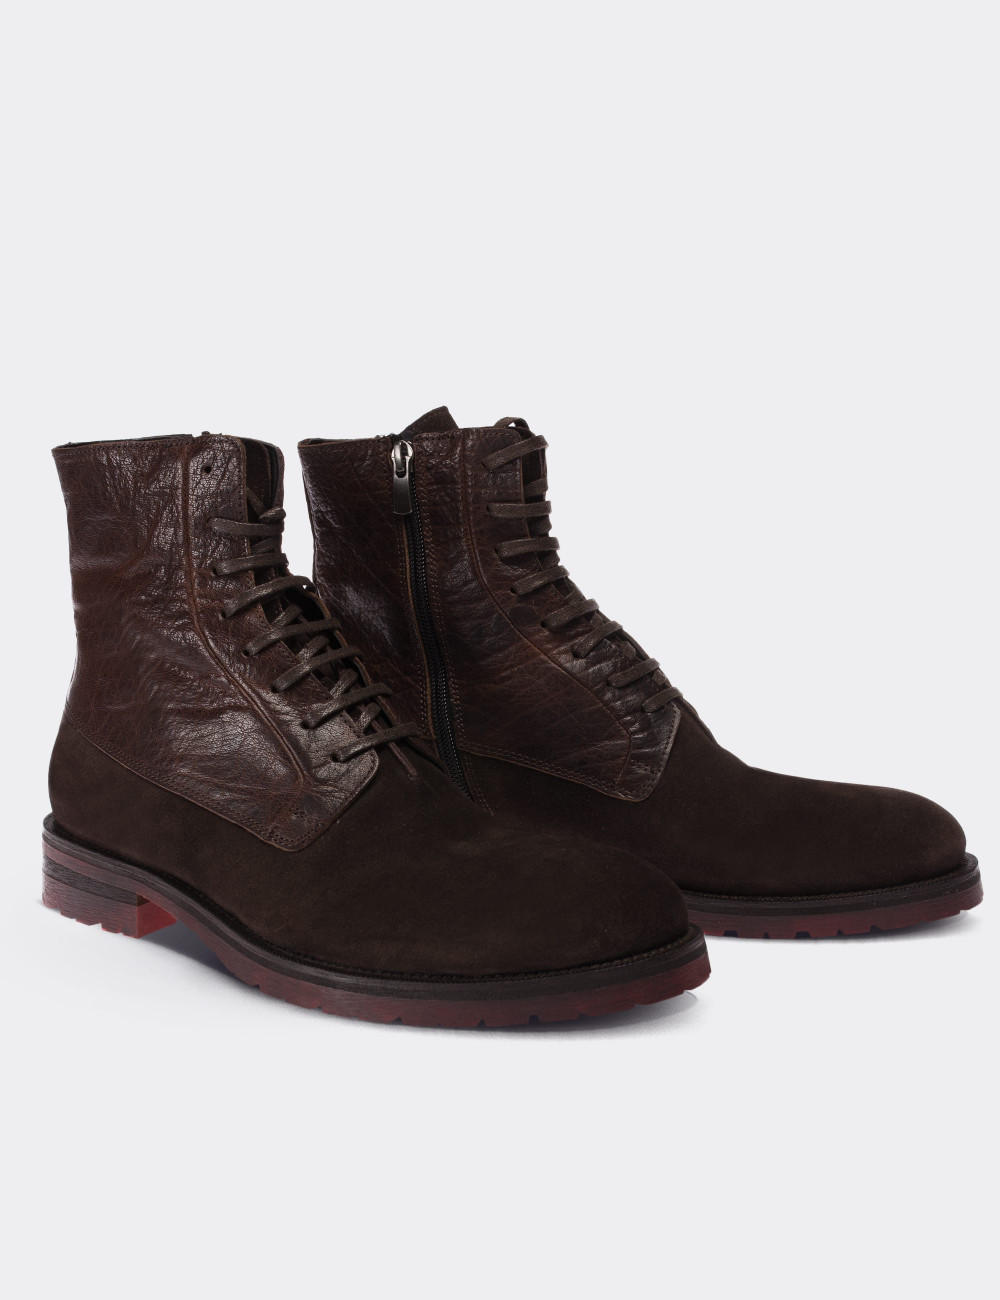 Brown Suede Leather Boots - 01324MKHVC03